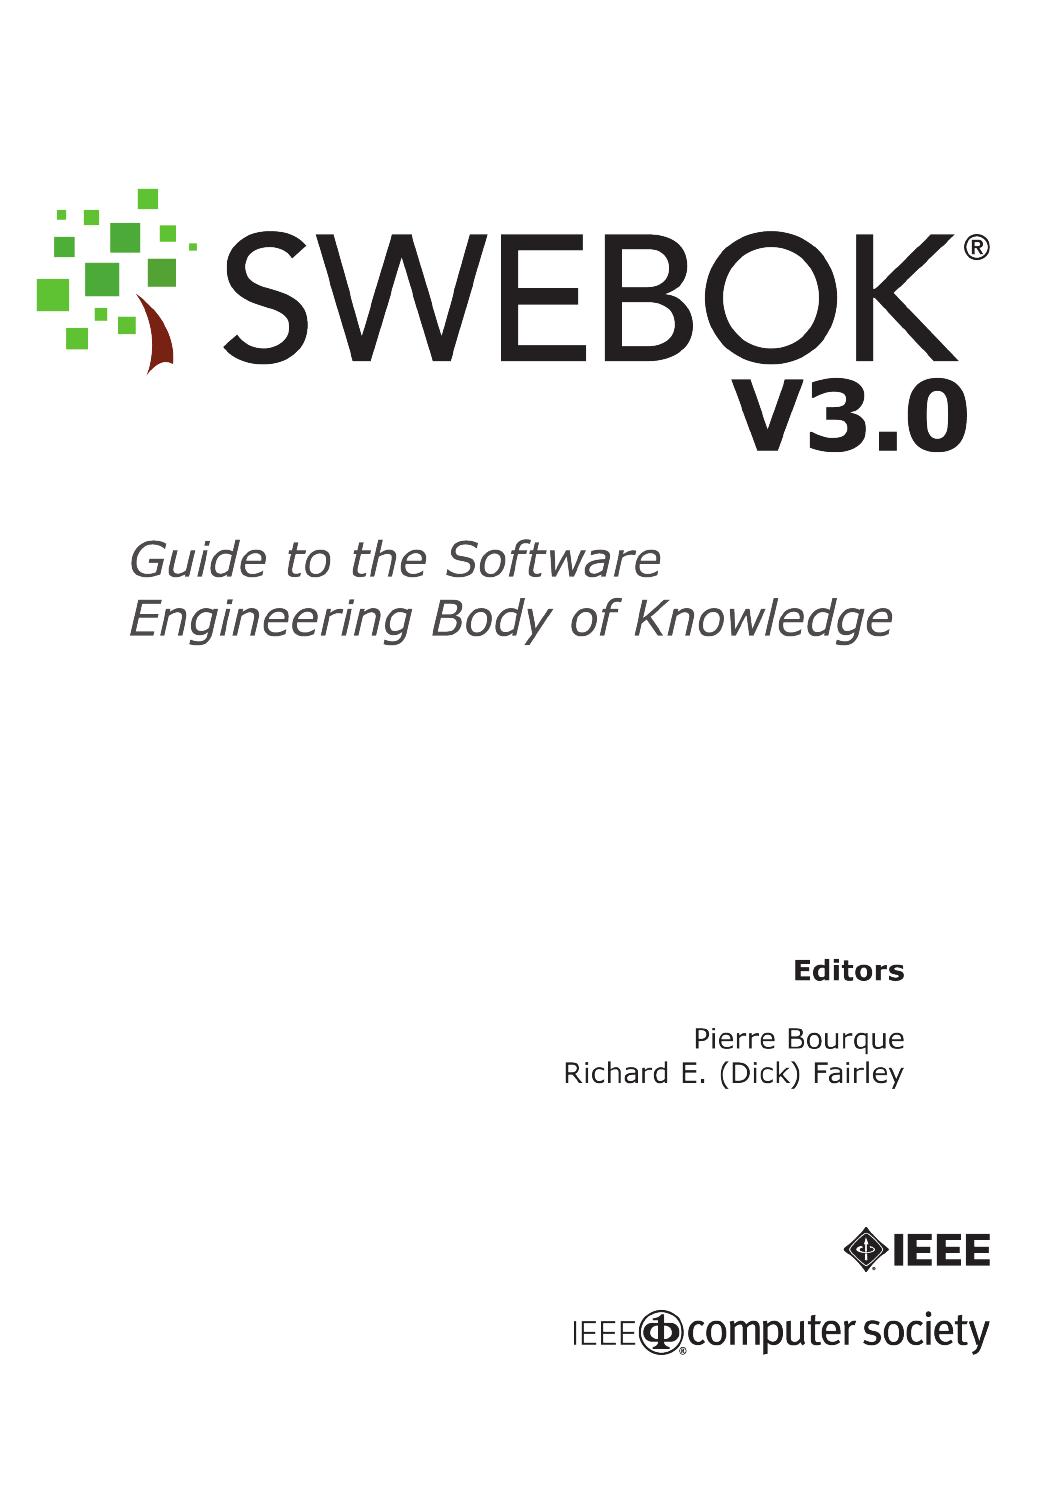 Guide to the Software Engineering Body of Knowledge Version 3.0 (SWEBOK Guide V3.0)